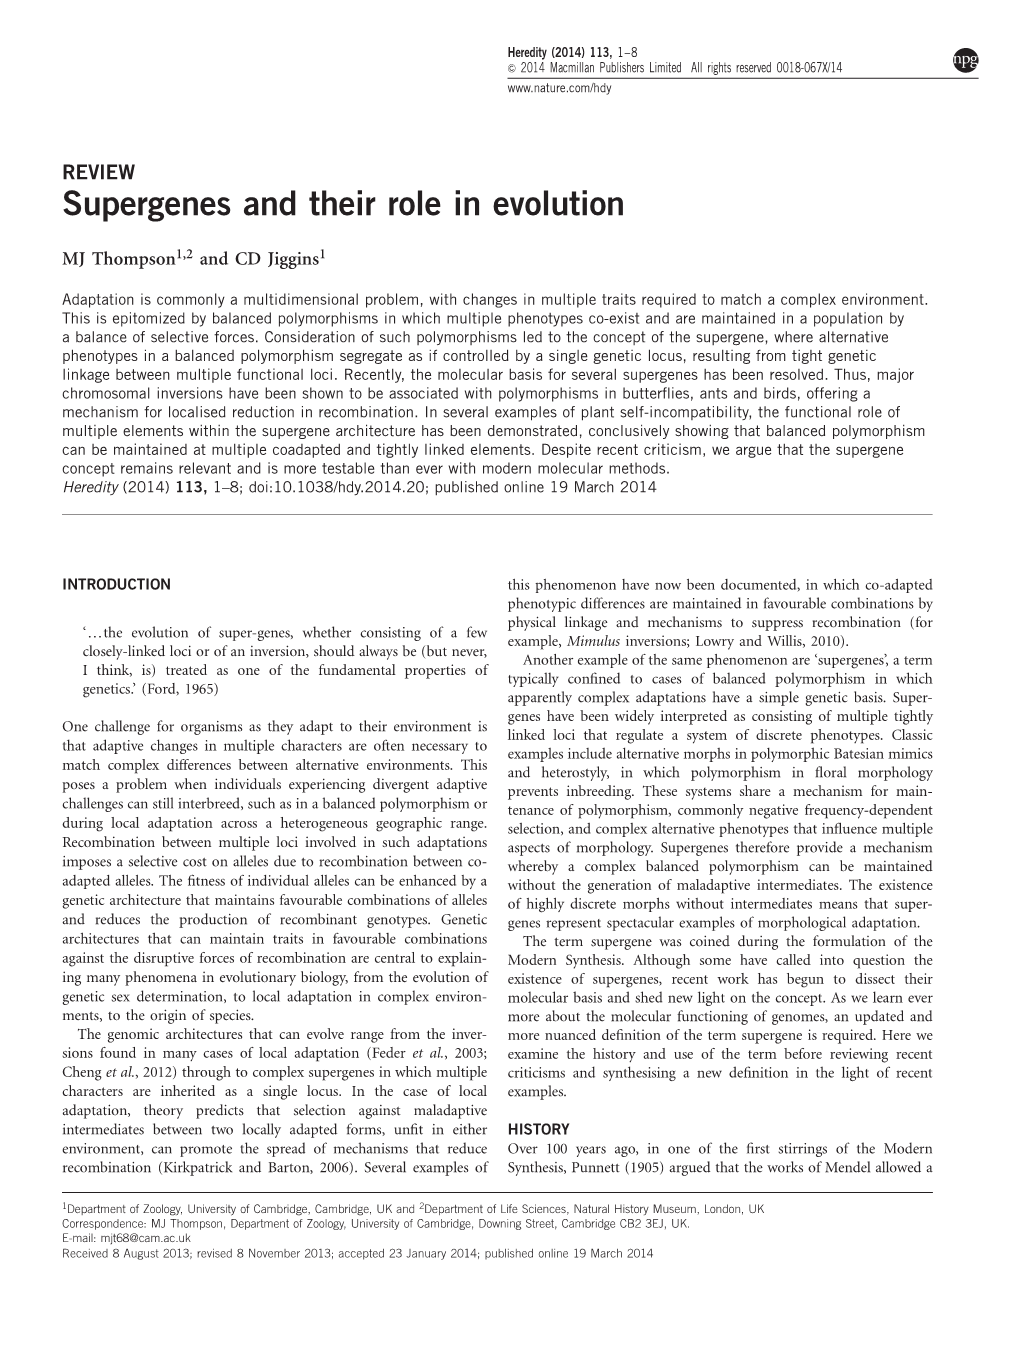 Supergenes and Their Role in Evolution